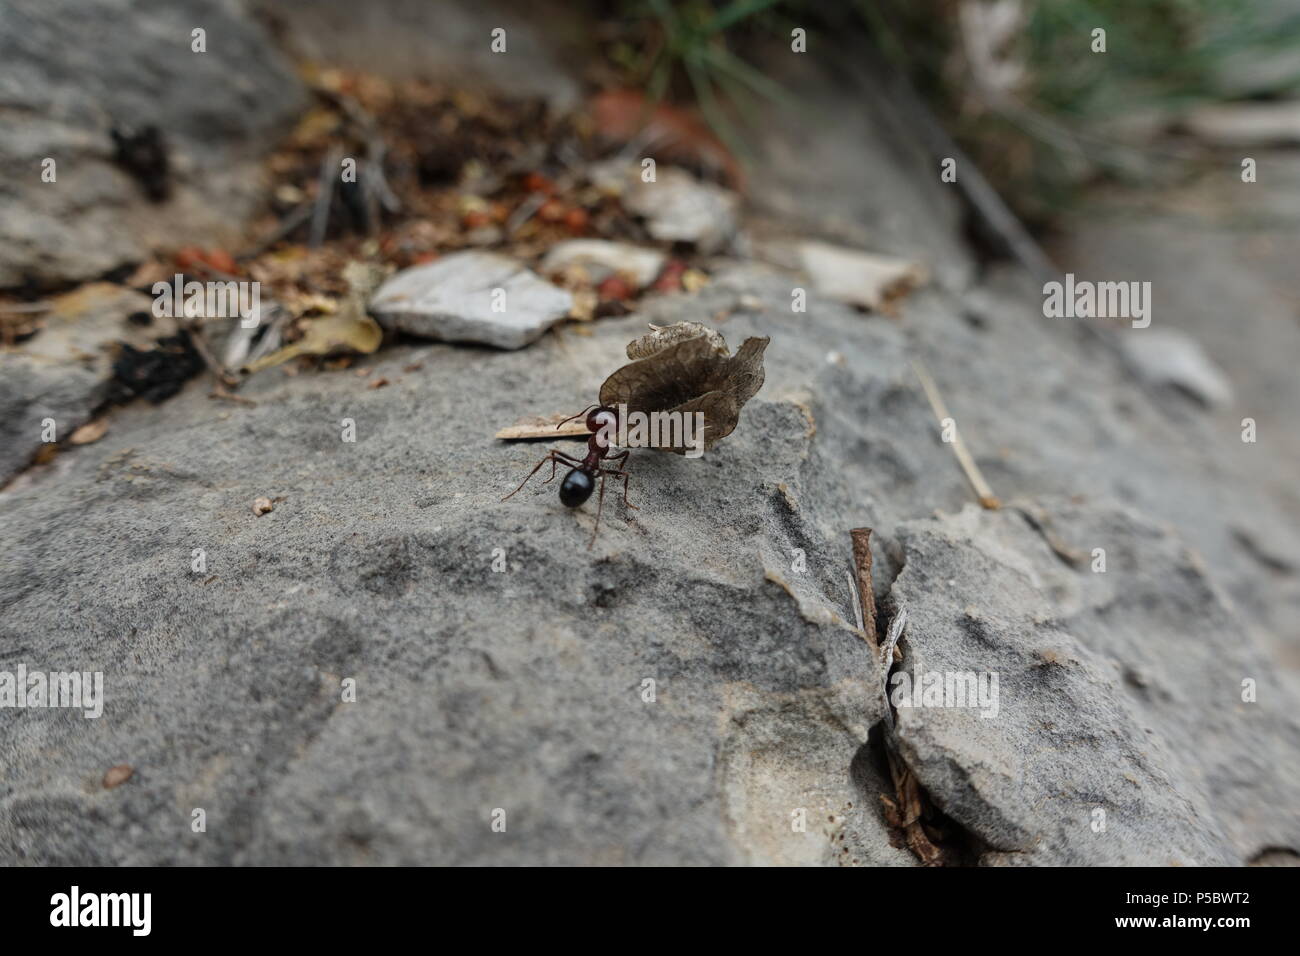 Ant Carrying a Leaf on a Mountain Rock Stock Photo